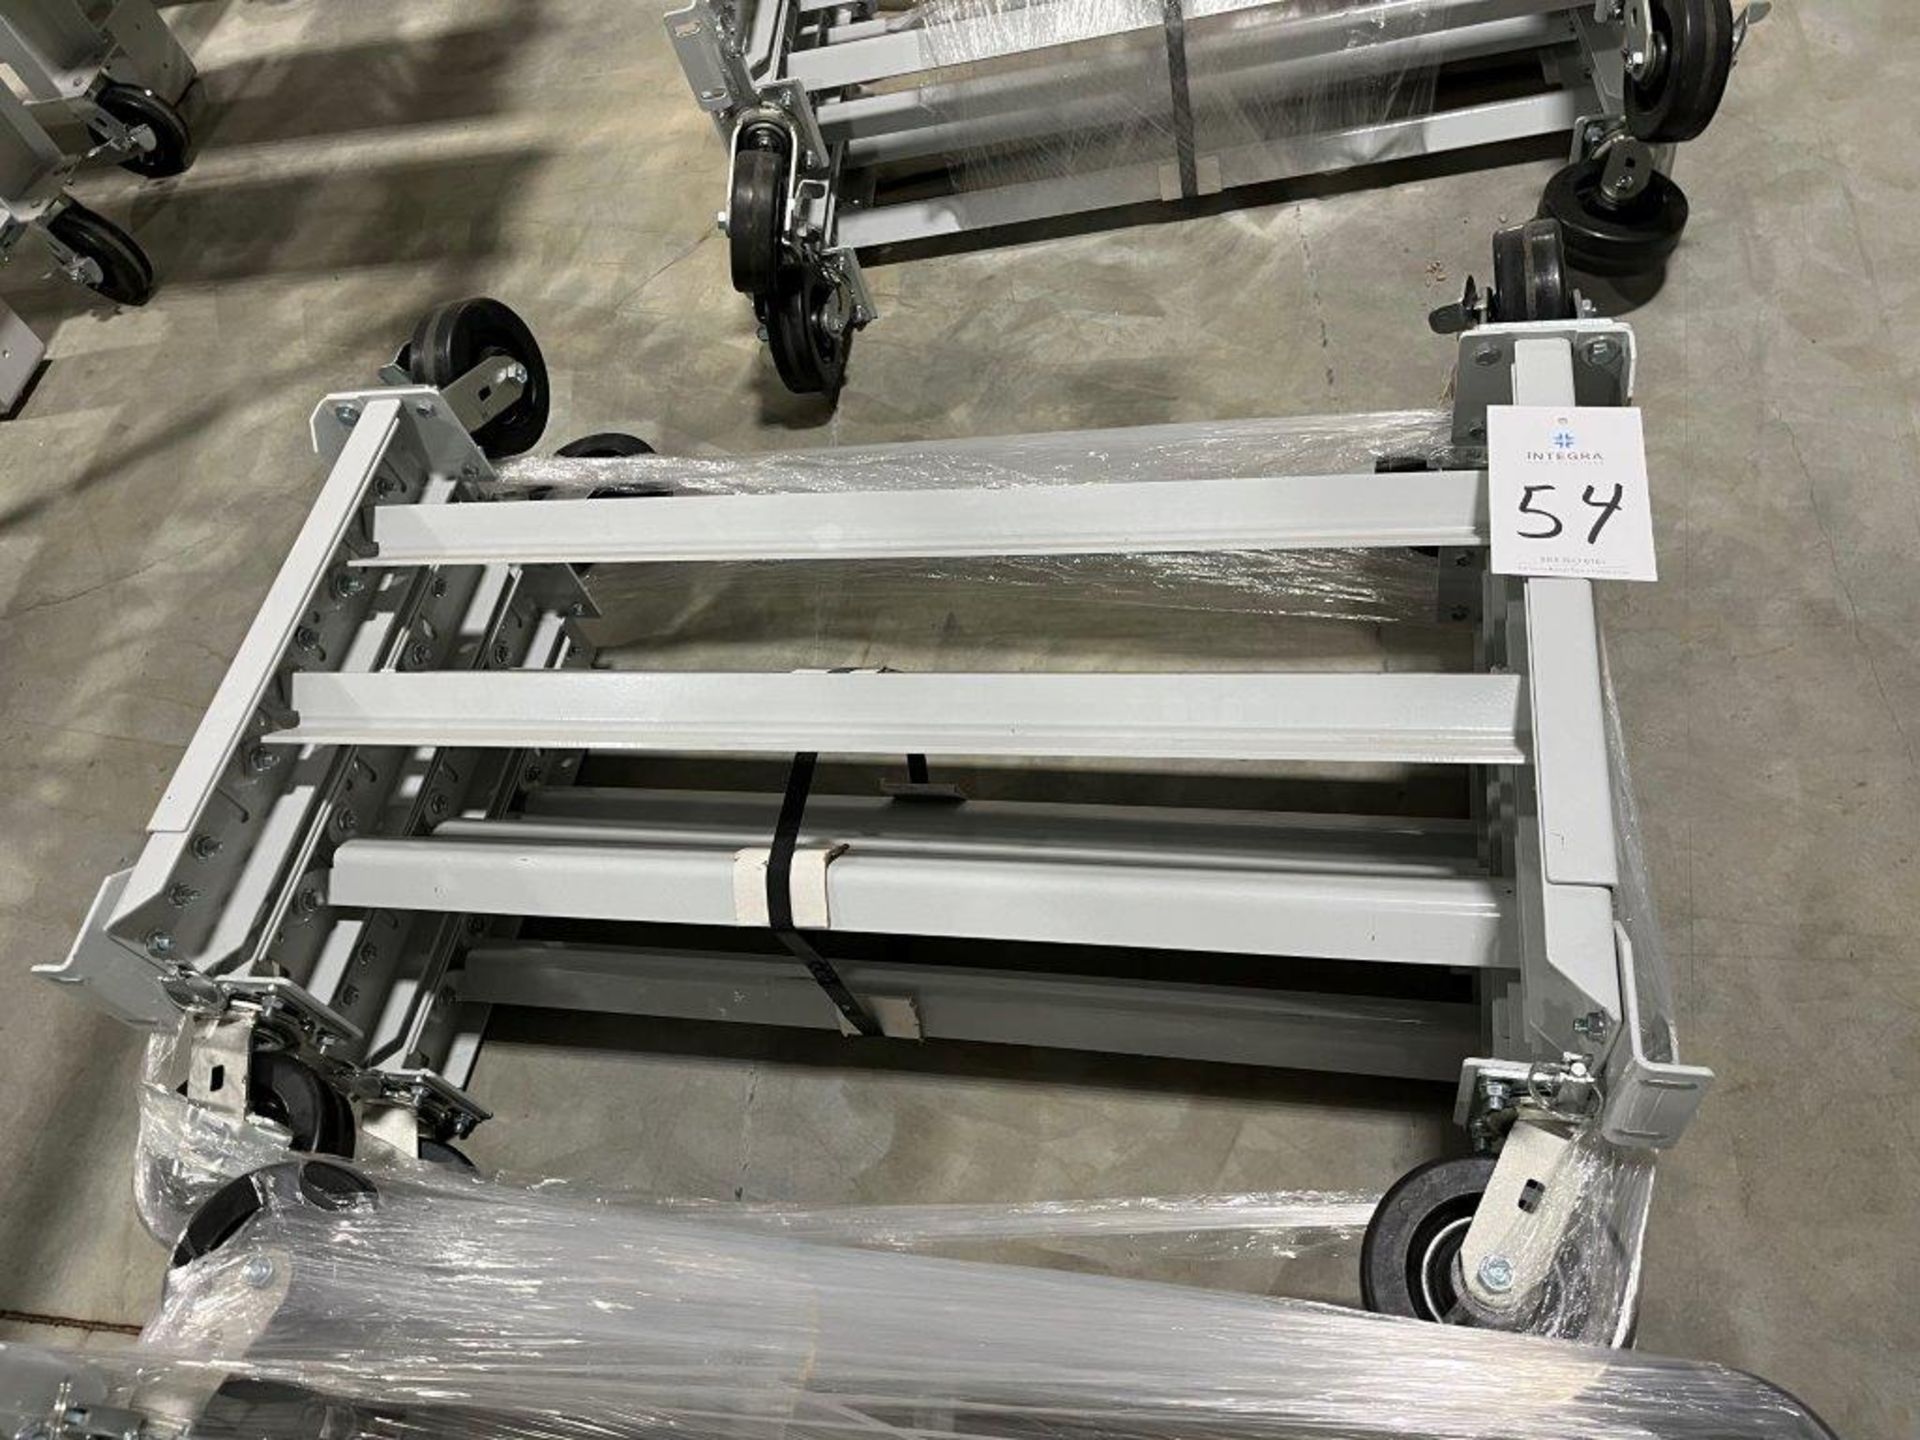 (8) Adjustable Supports for 48" Conveyor